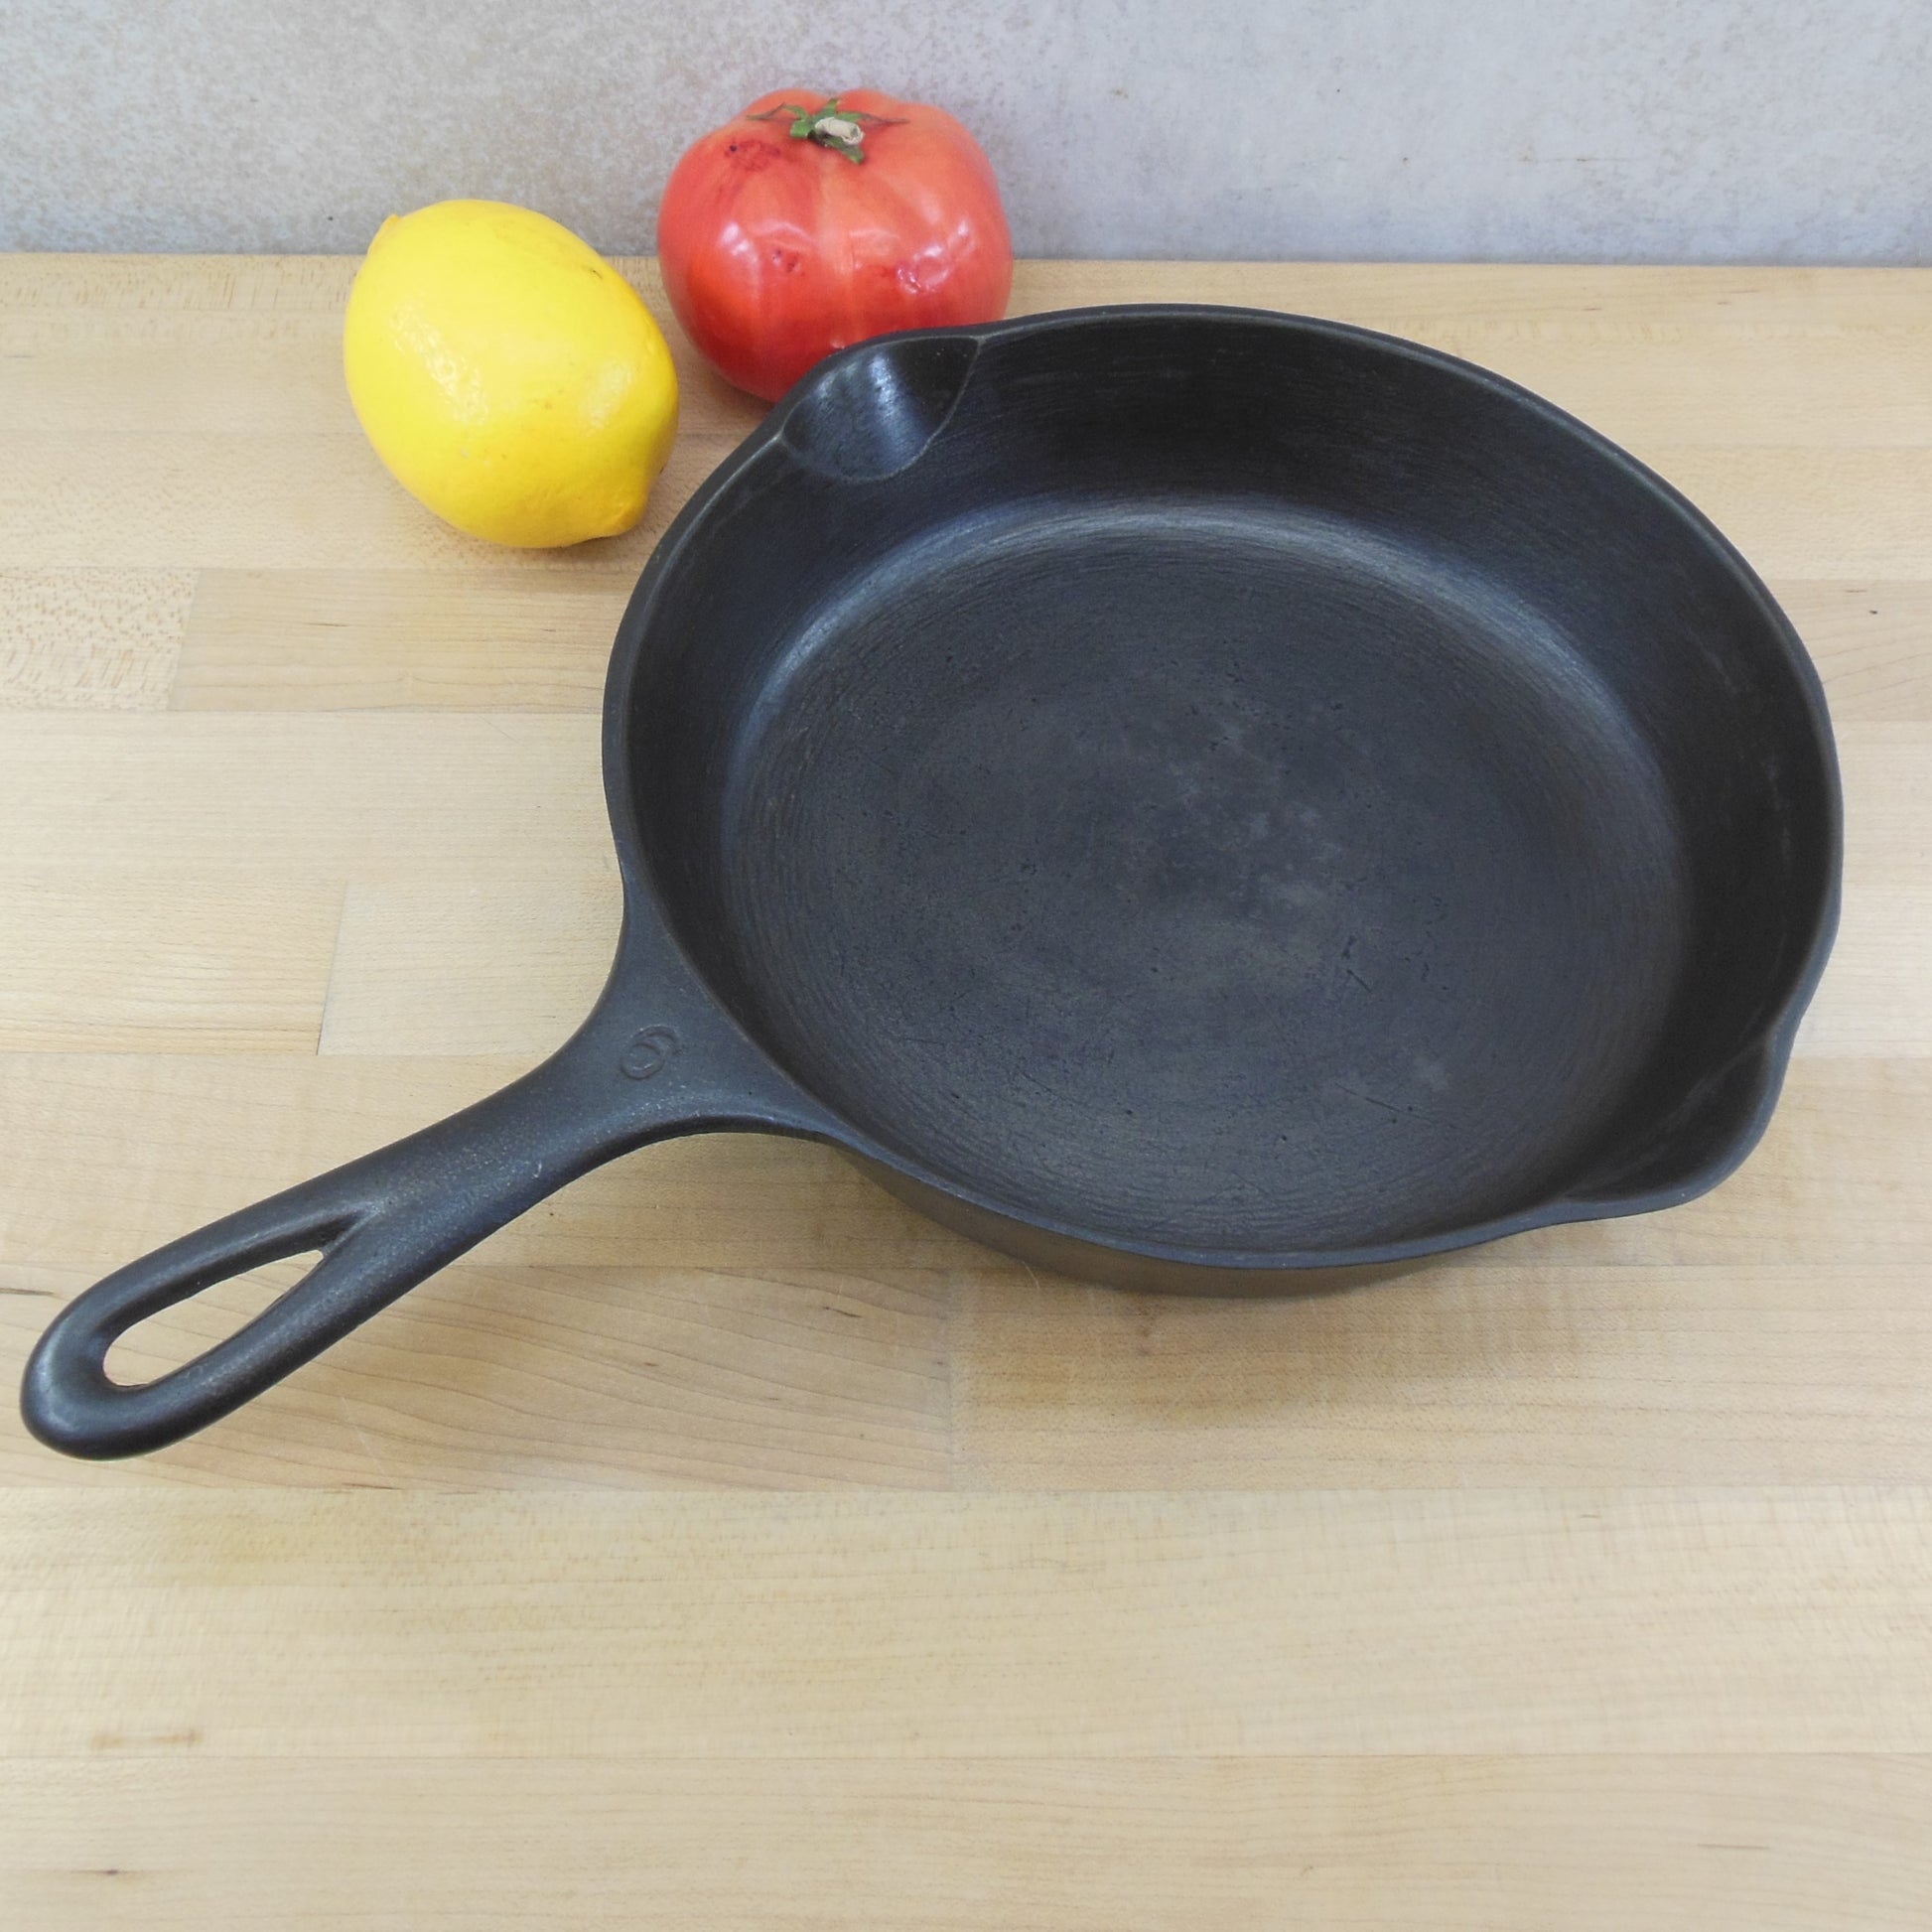 6.25 Shallow Round Cast Iron Frying Pan / Skillet with Handle (1 Skillet)  by MyXOHome, 1 - Harris Teeter